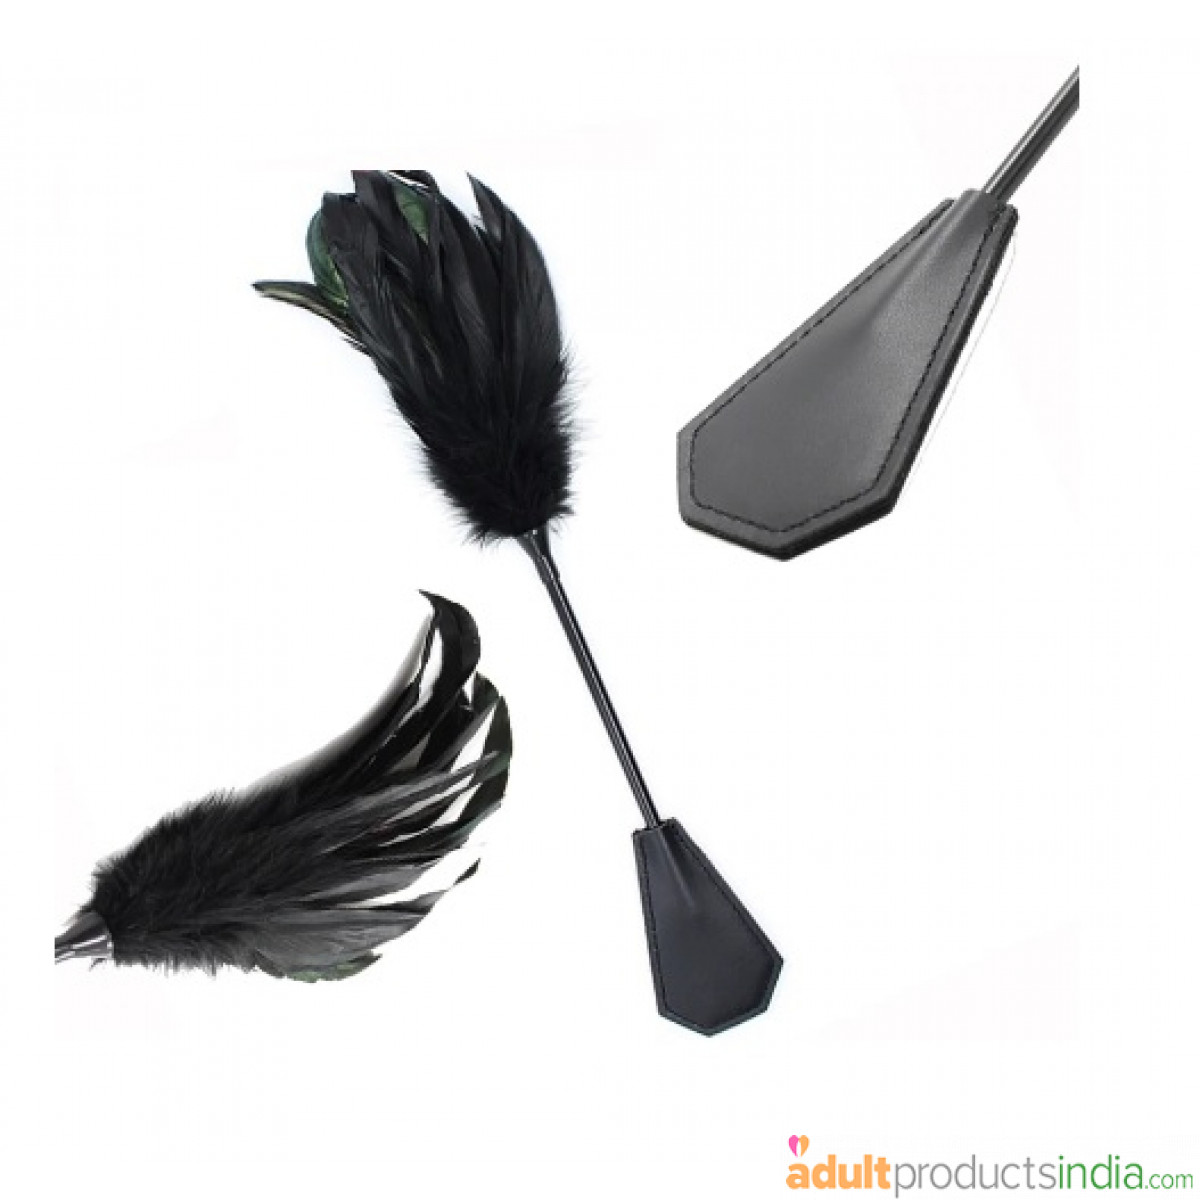 Spanking Paddle And Tickler - Black